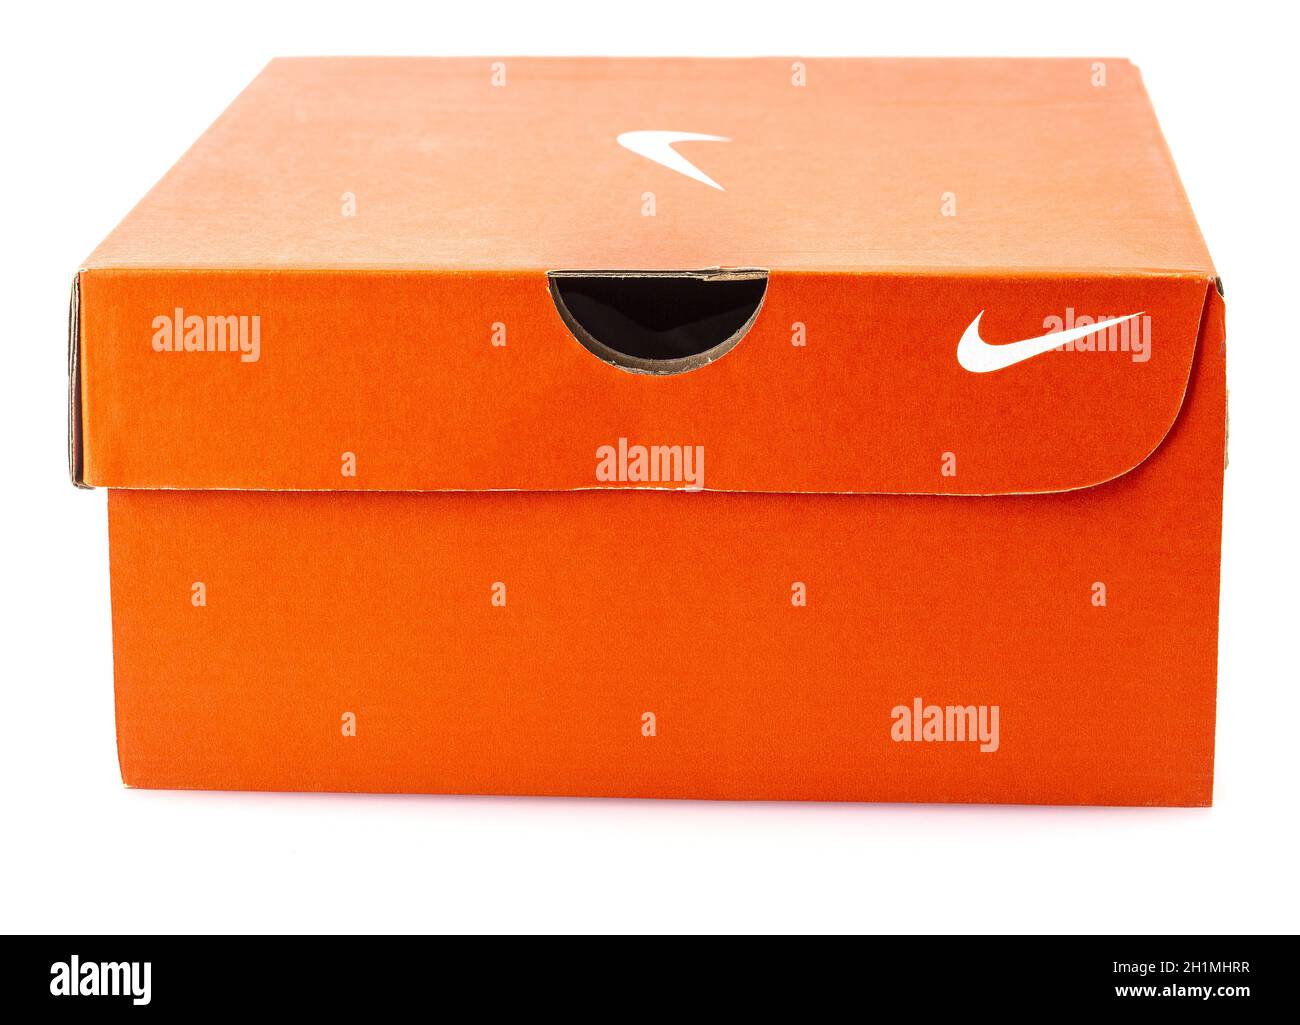 KAMCHATKA, RUSSIA - 25 DESEMBER, 2019: Nike shoes box isolated on white background. Nike is one of the world Stock Photo